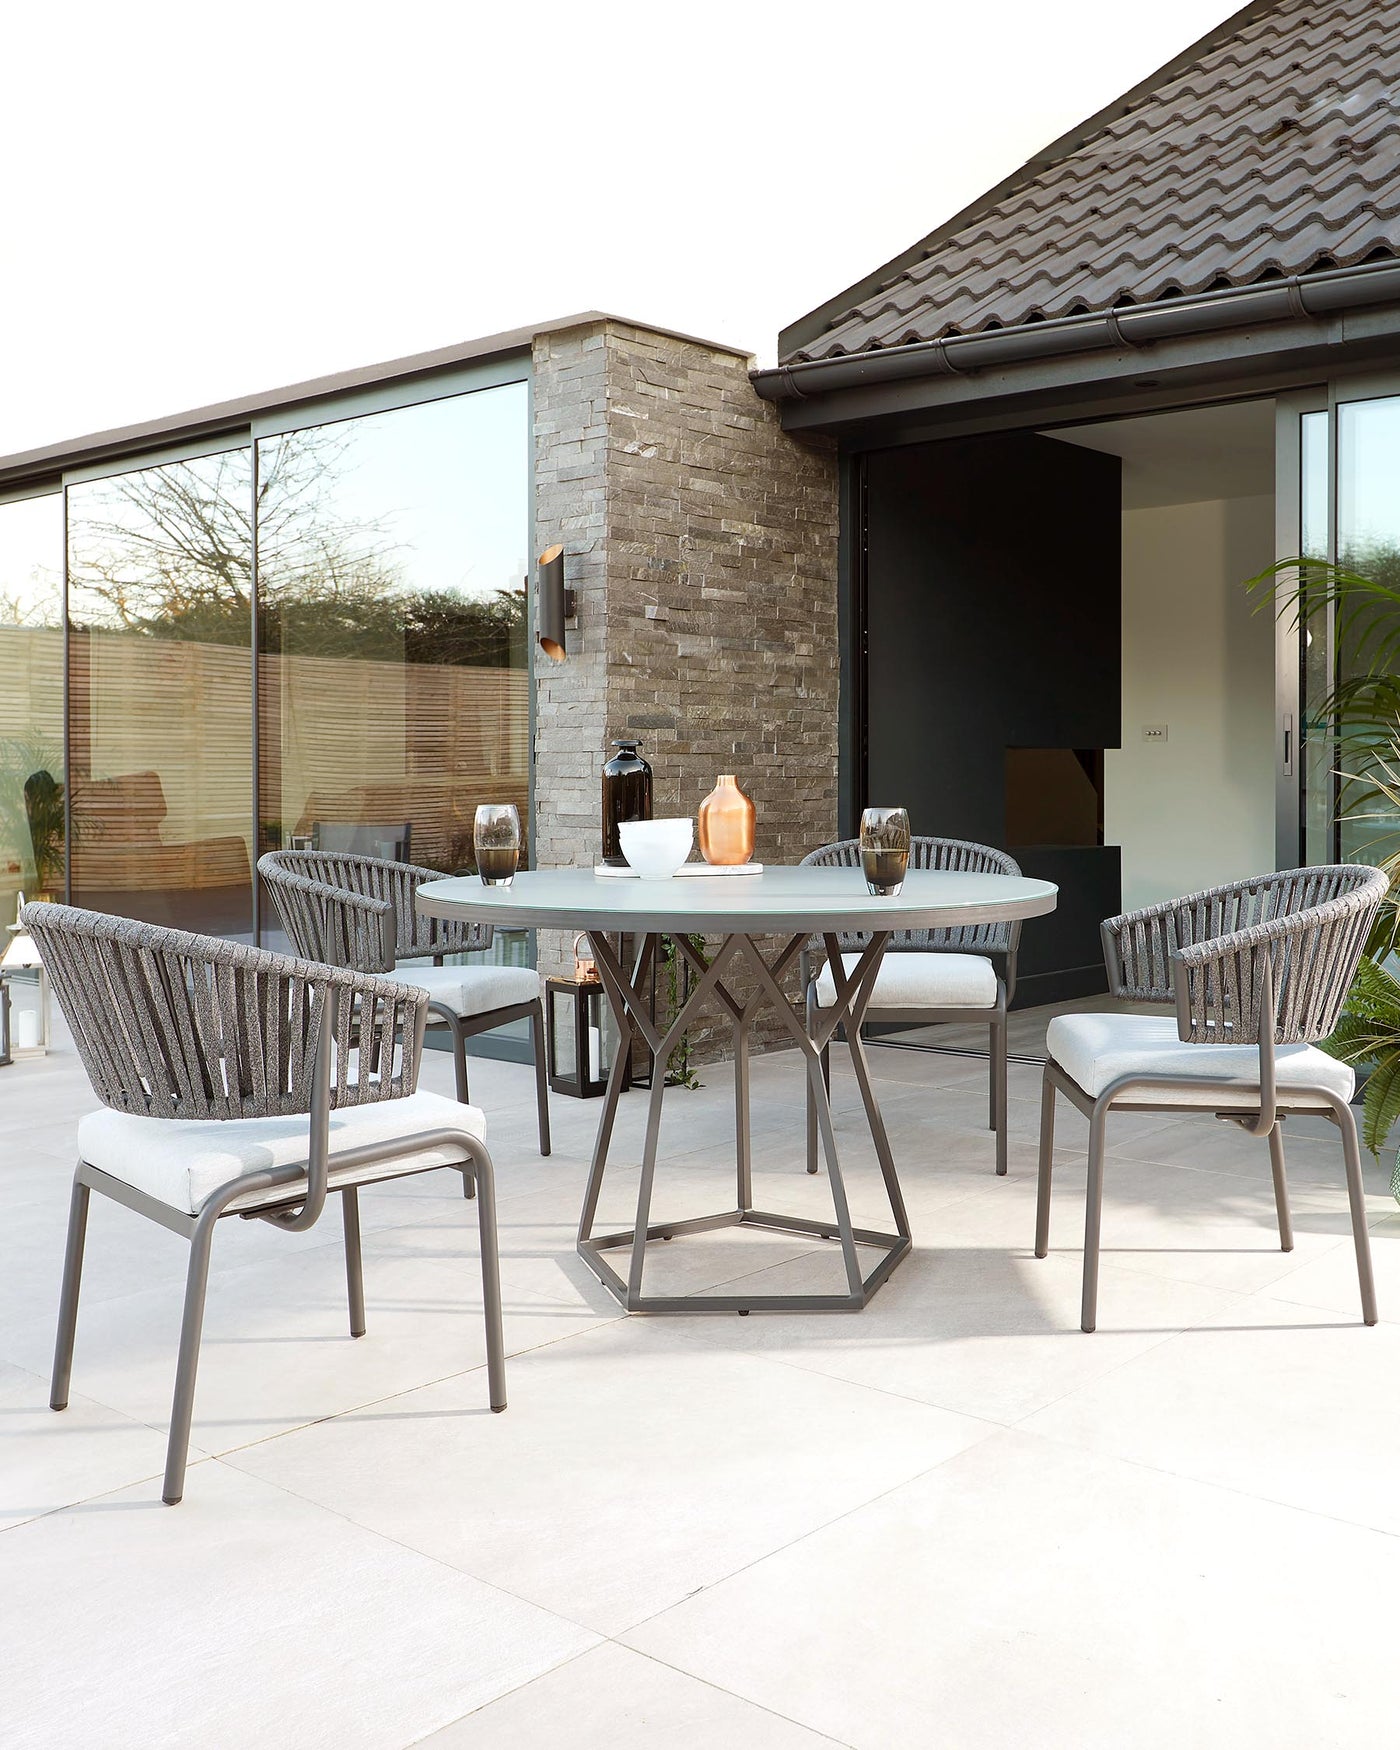 Contemporary outdoor dining set featuring a round, smoky glass-topped table with a unique geometric metal base, and four matching armchairs with woven backrests and seat cushions.